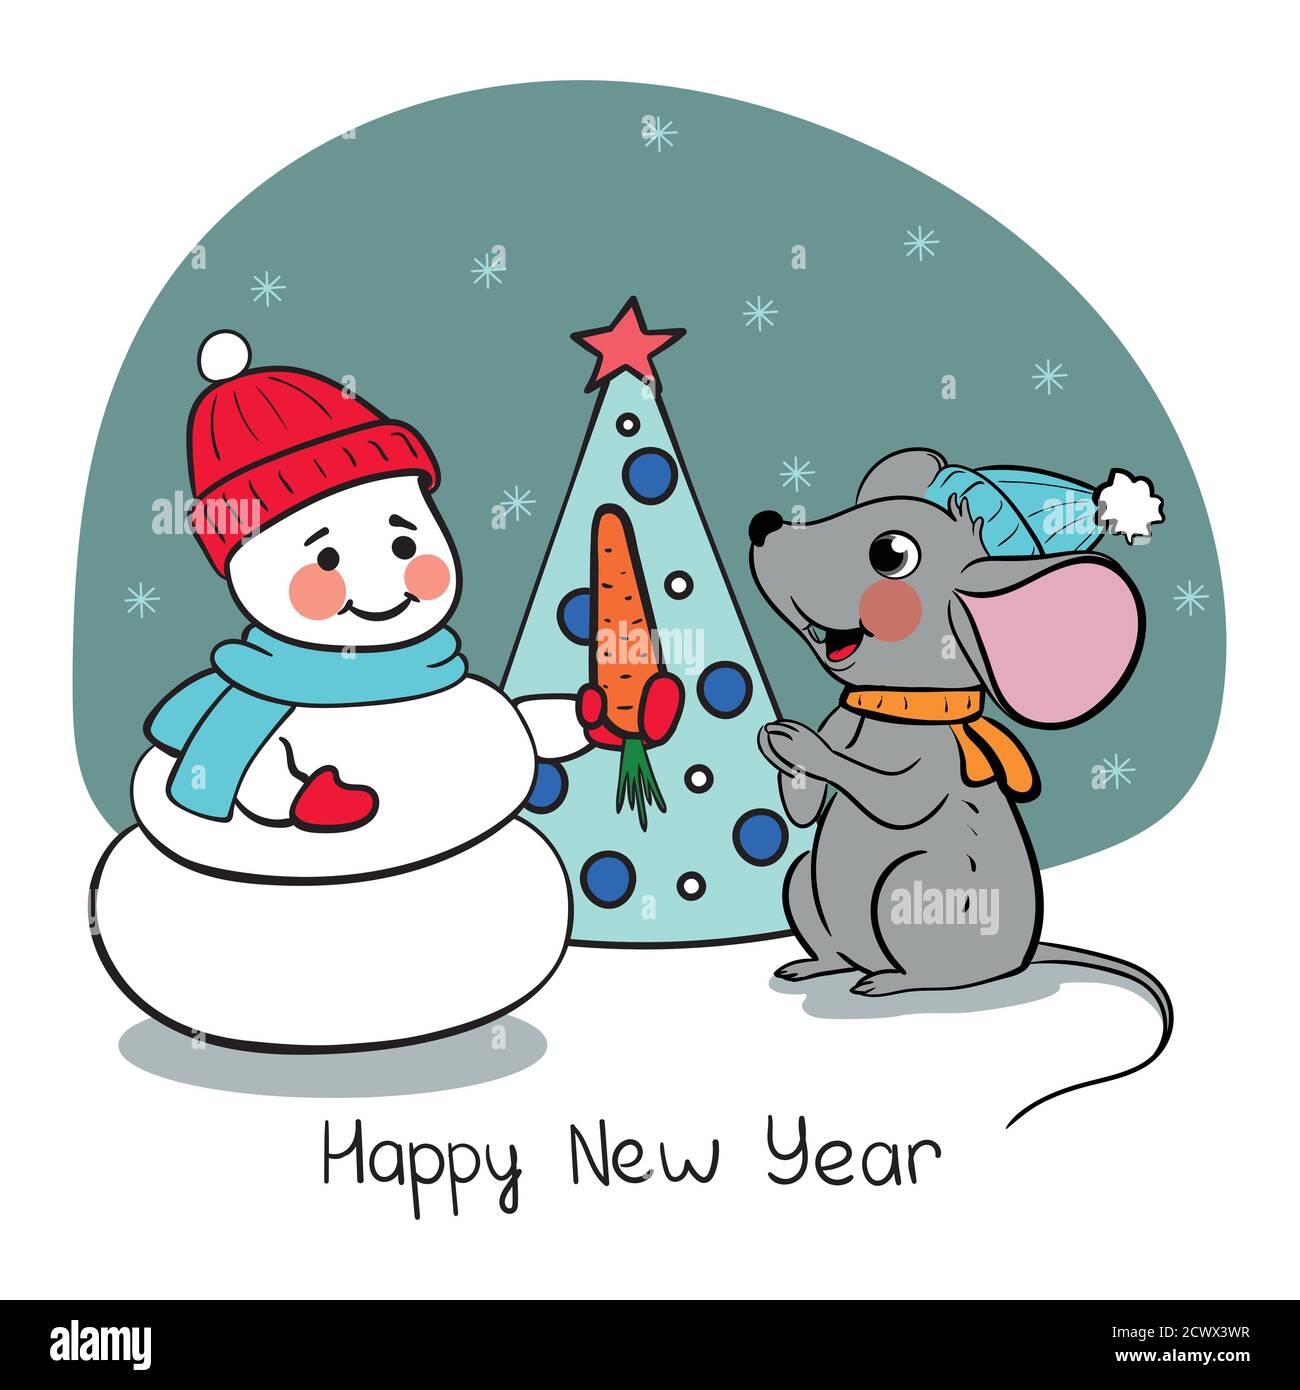 Card with cute little mouse and snowman: Happy New Year. Vector illustration in red and blue for Christmas posters, cards, gift tags Stock Vector